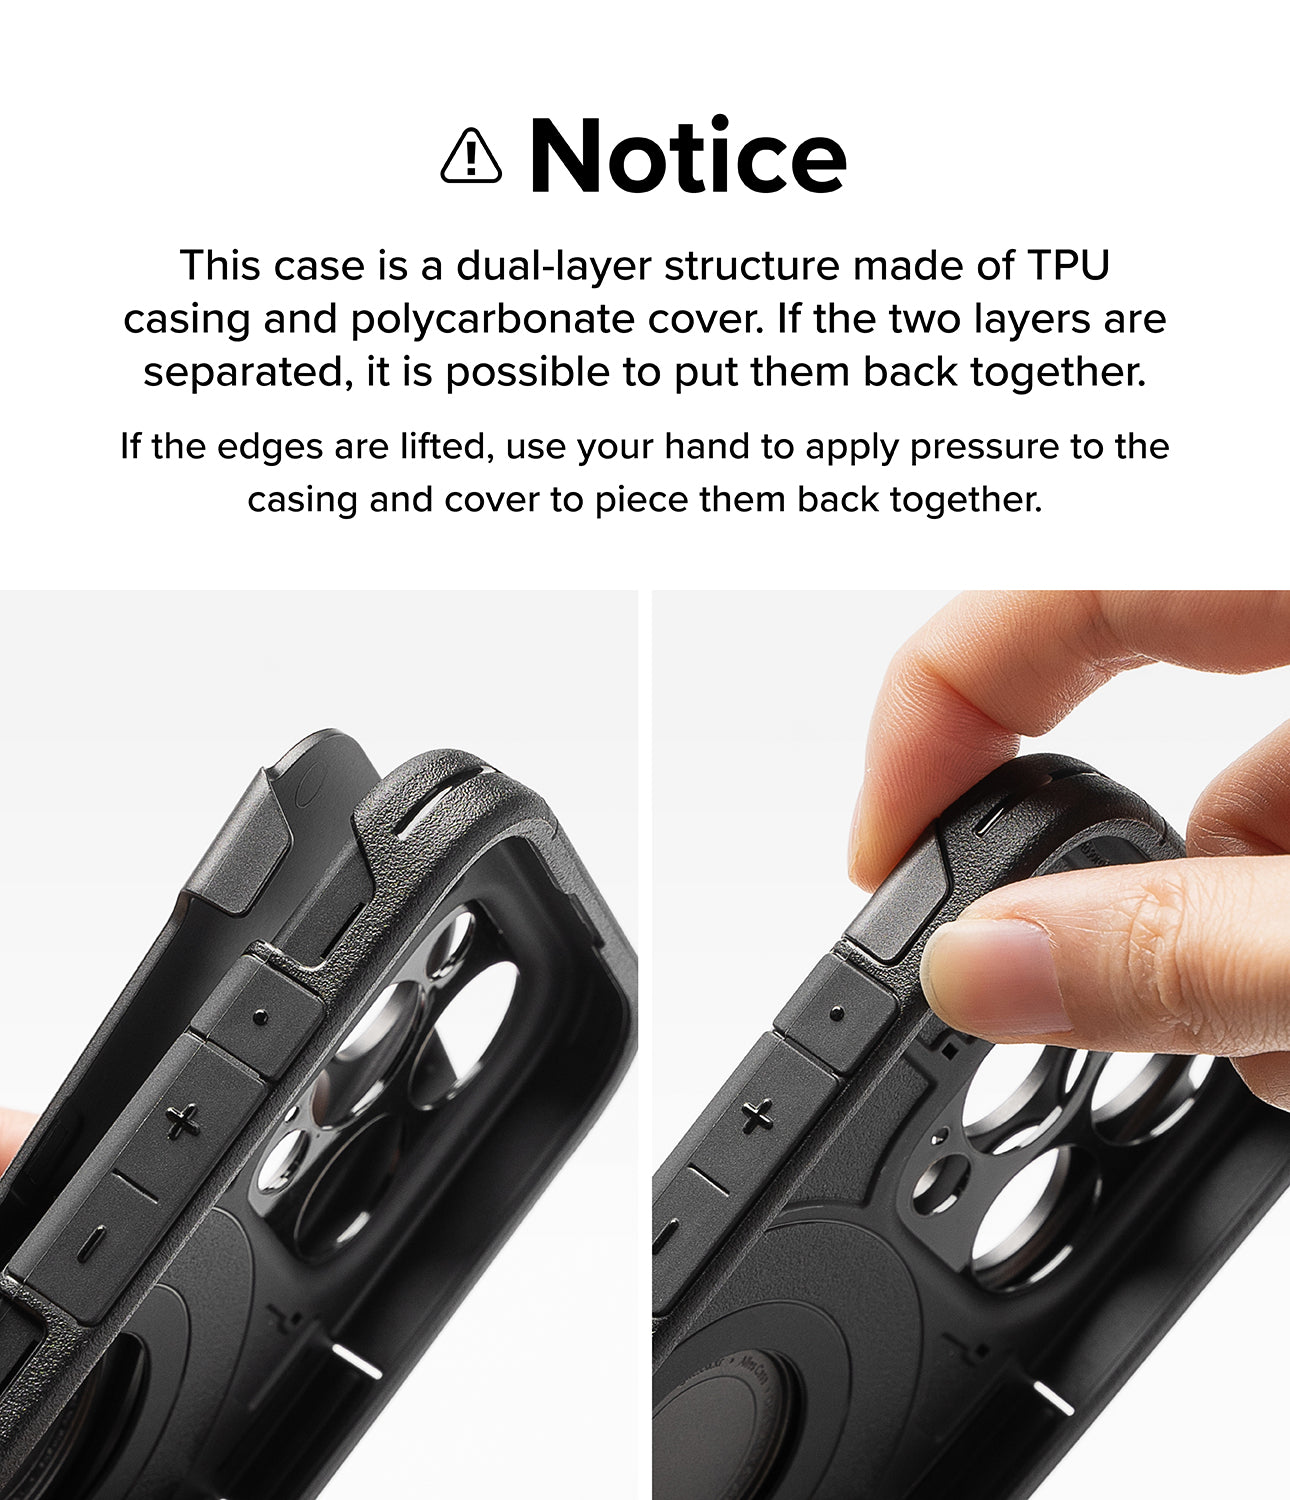 iPhone 15 Pro Max Case | Alles - Gun Metal- Notice. This case is a dual-layer structure made of TPU casing and polycarbonate cover. If the two layers are separated, it is possible to put them back together. If the edges are lifted, use your hand to apply pressure to the casing and cover to piece them back together.